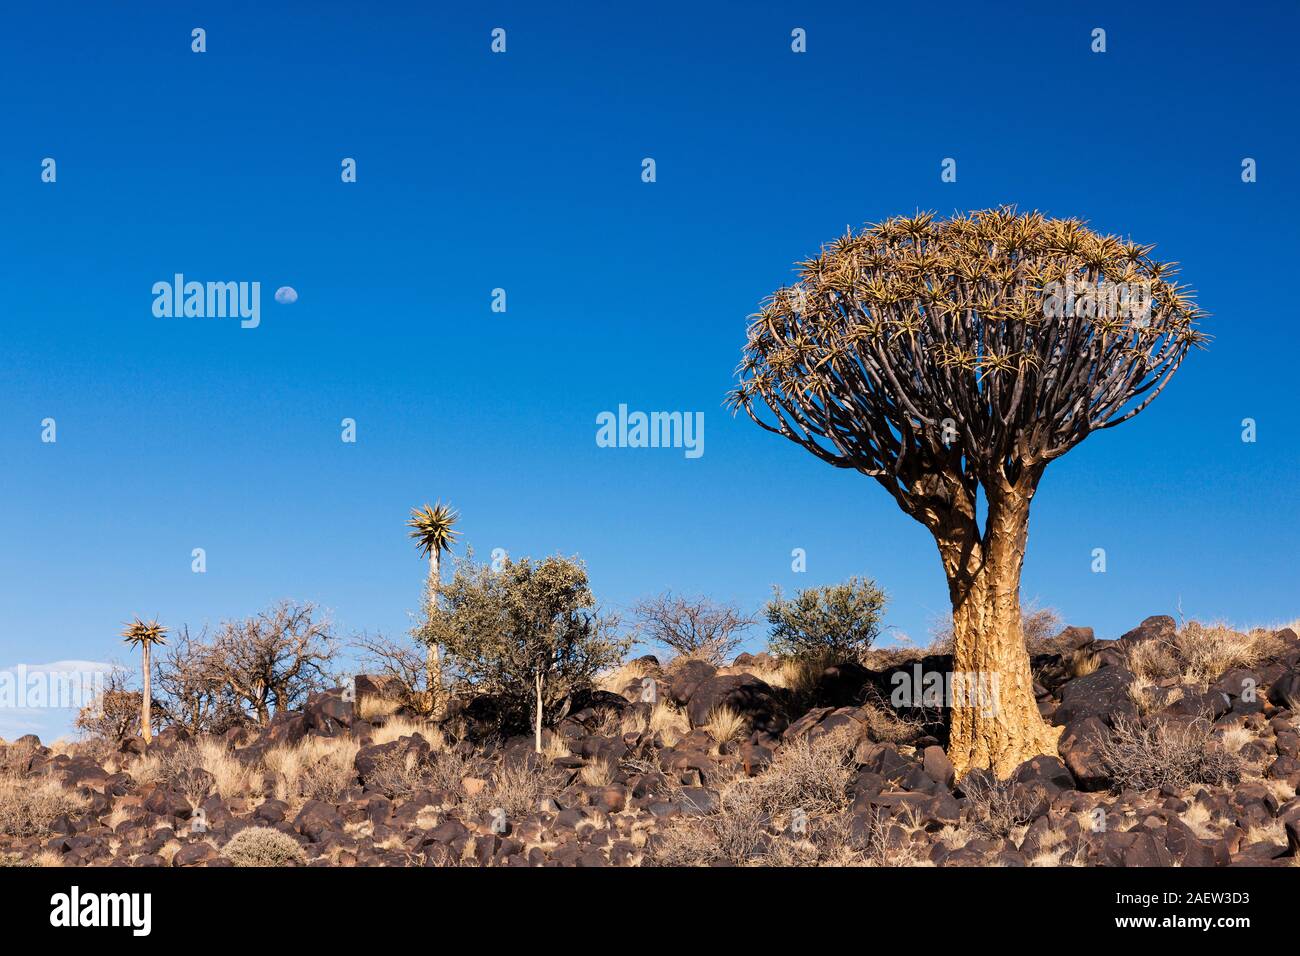 Quiver Tree Forest, Aloe dichotoma, giant succulent plant, early morning, Keetmanshoop, Karas Region, Namibia, Southern Africa, Africa Stock Photo